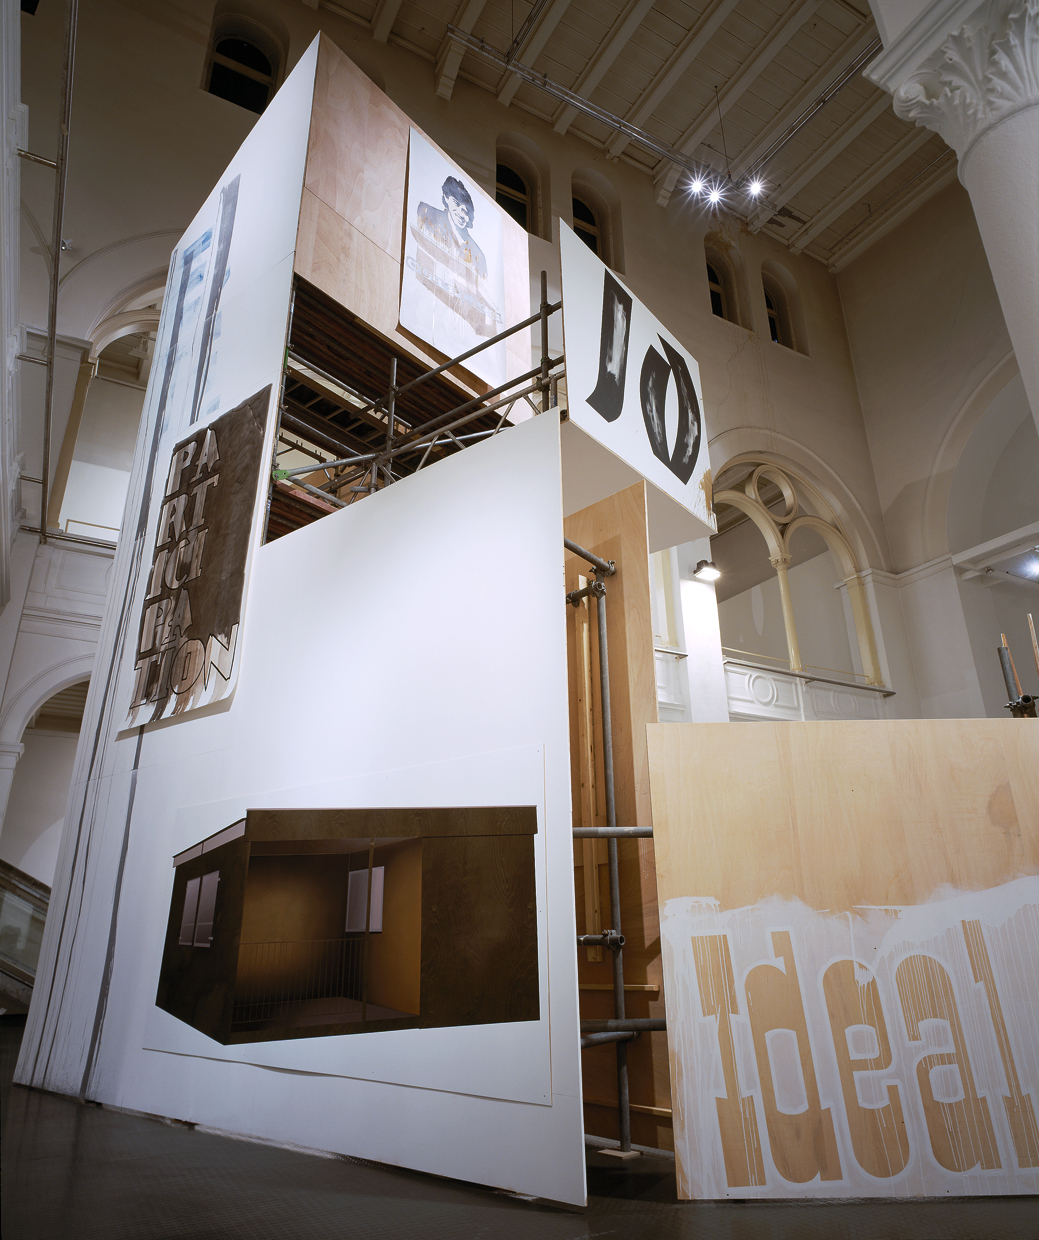 Daniela Brahm Highrise, 2005 spatial structure of scaffolding and plywood combining backstage material, text and paintings